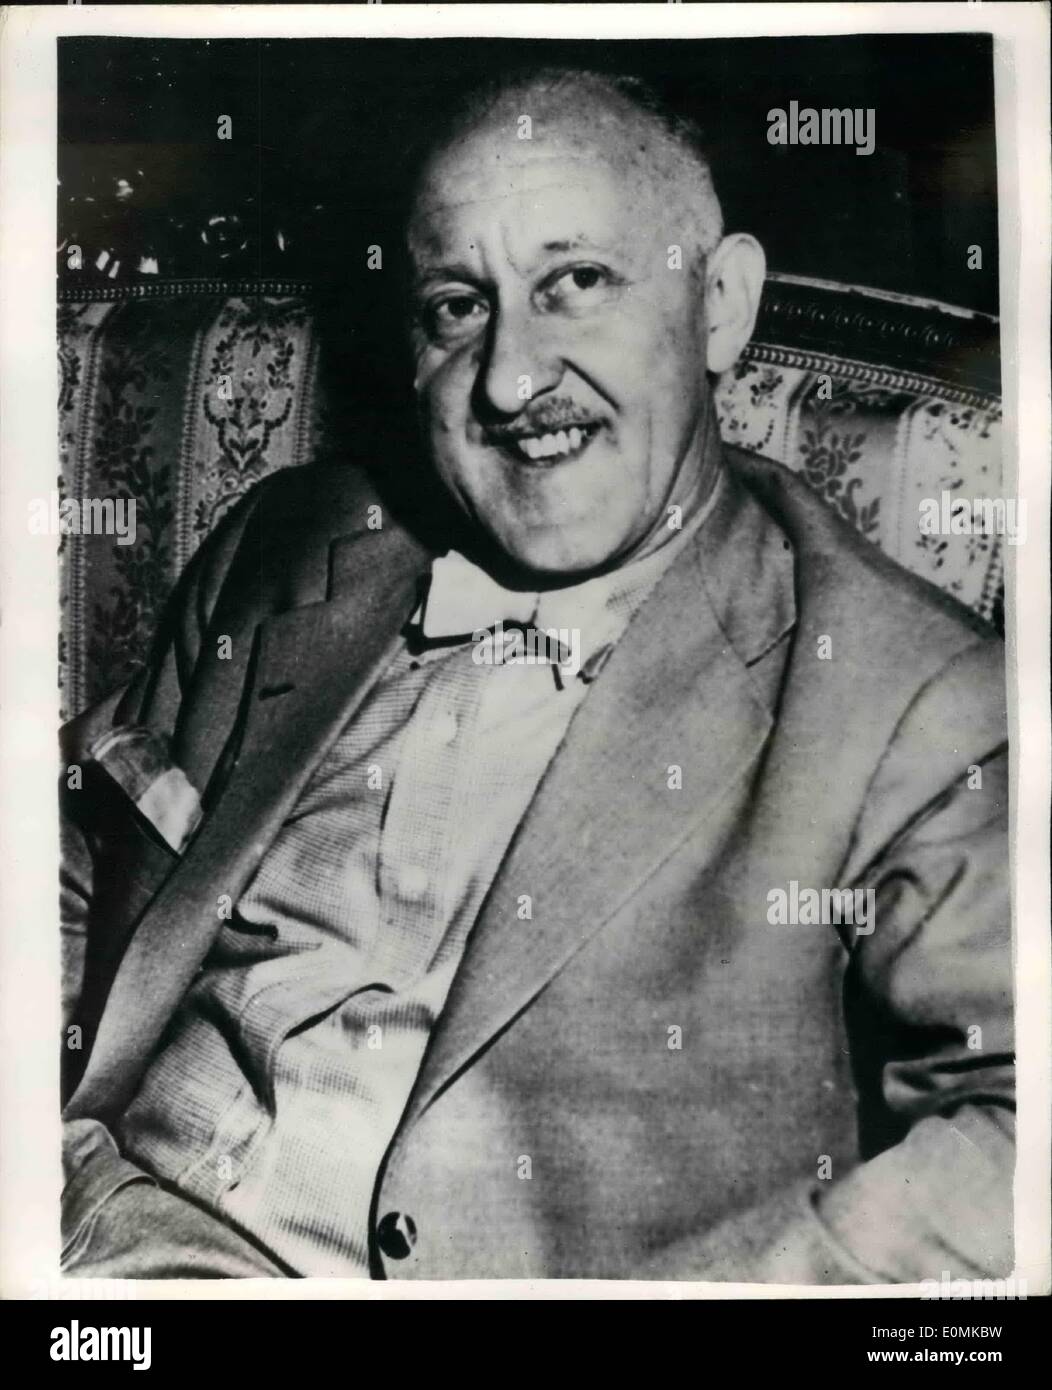 Oct. 10, 1955 - He winds the Nobel Prize for Literature- 1955: Photo shows Icelandic  Author Halldor Laxness who has been awarded the 1955 Nobel Prize for  Literature Stock Photo - Alamy